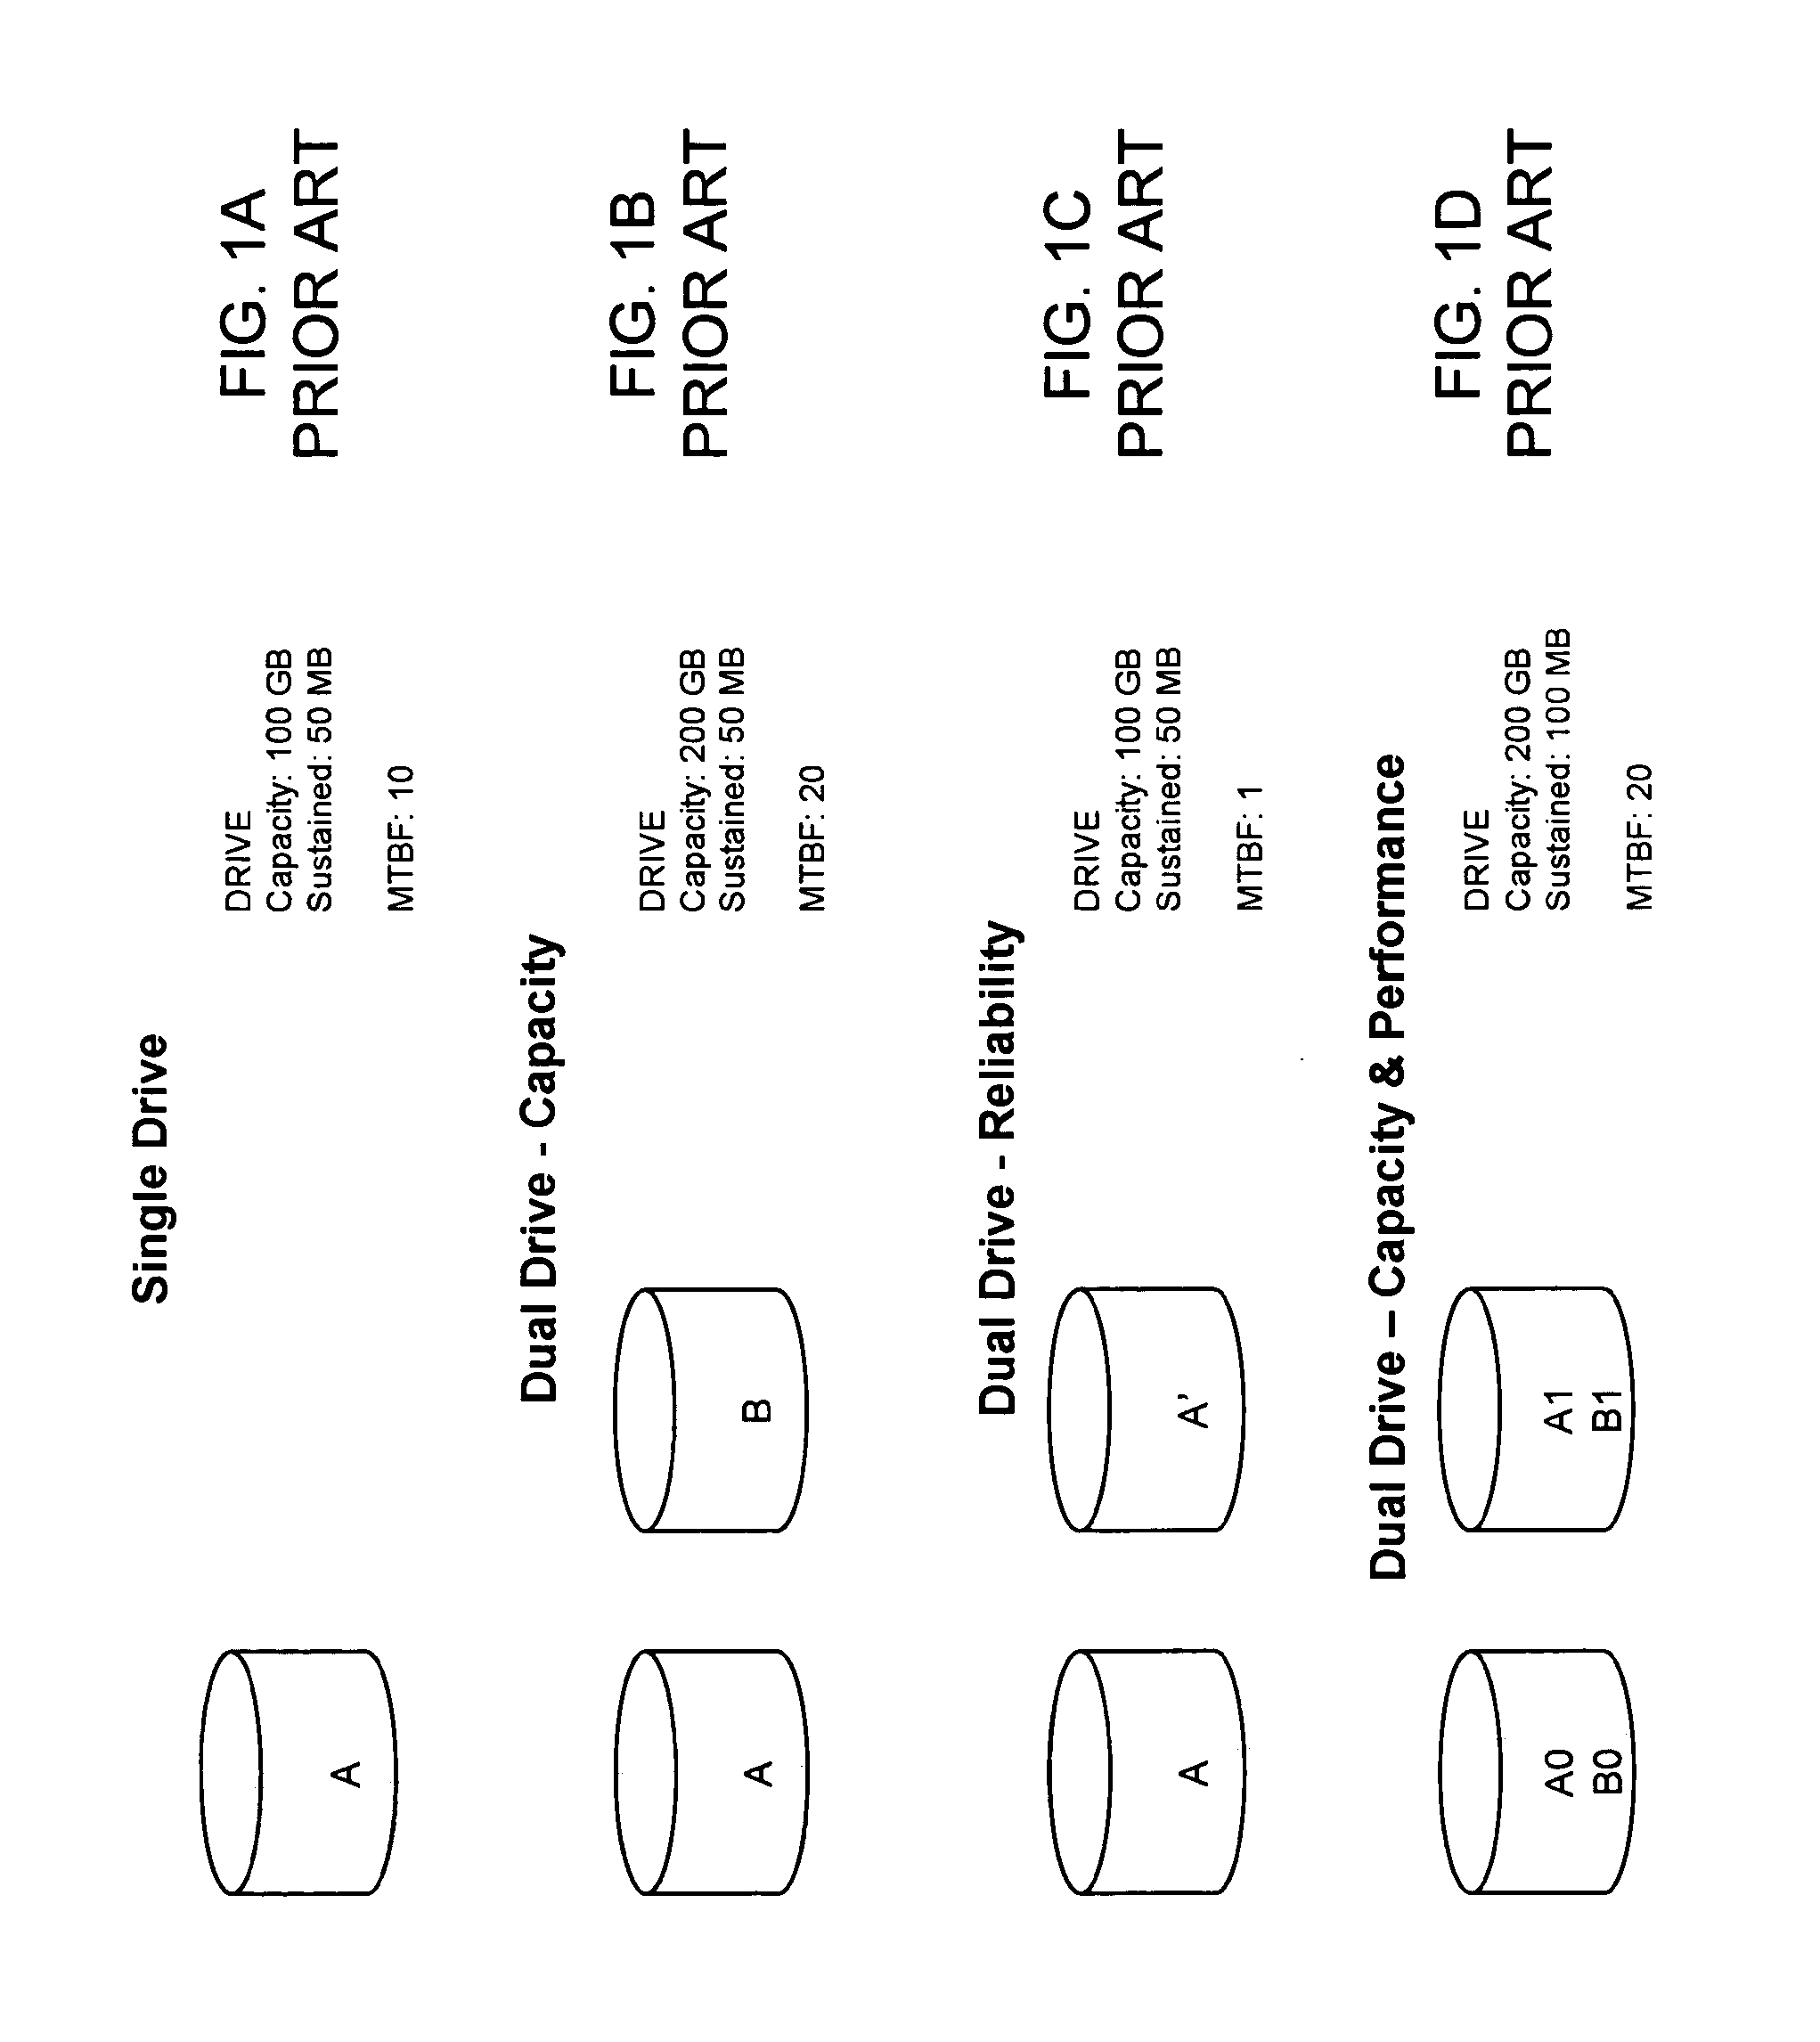 Disk controller methods and apparatus with improved striping, redundancy operations and interfaces